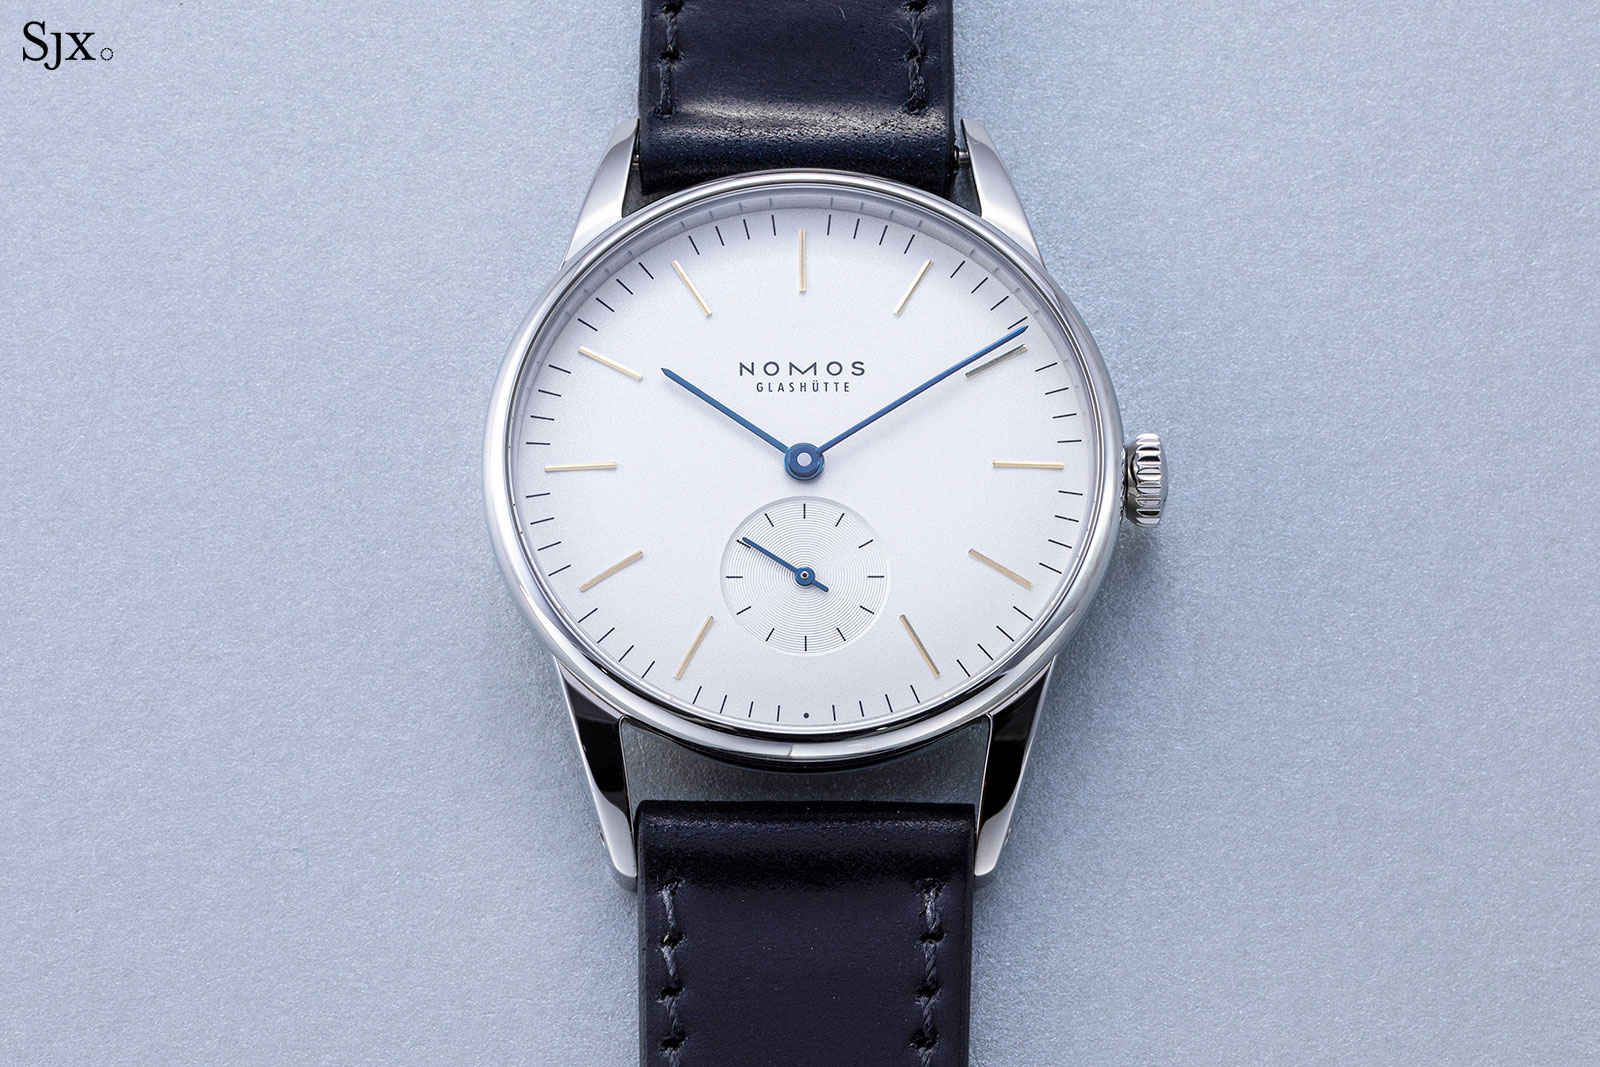 Up Close: Nomos Orion Hand-Wind | SJX Watches